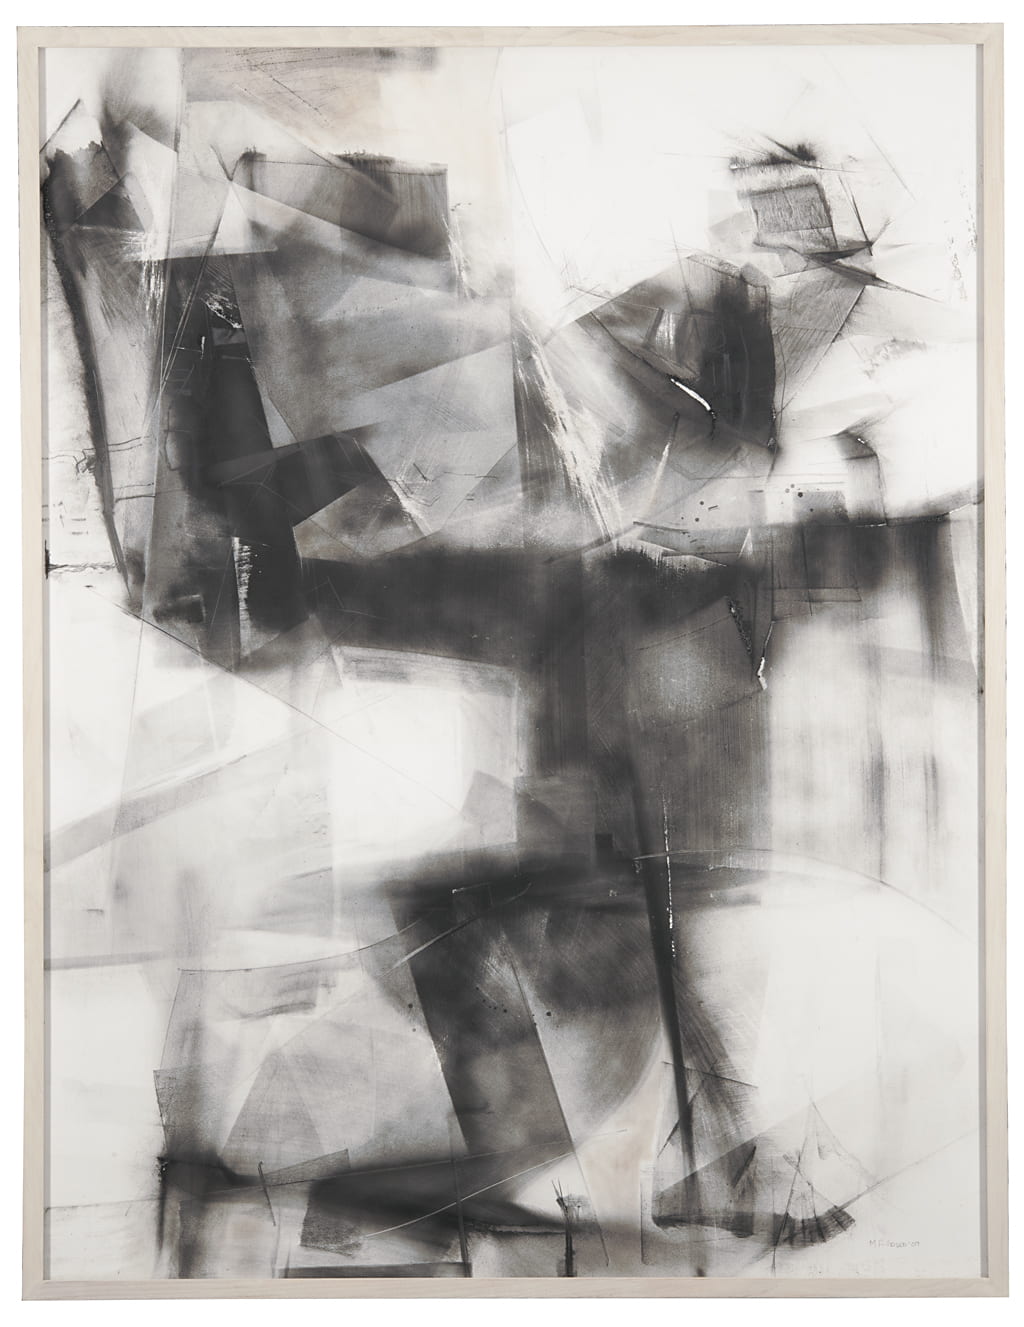 Drawing titled "Nowhere Fast" by artist Marvin Gould in the collection of the Beach Museum of Art. Shows strokes and shading created with graphite, charcoal, rust powder etc. The shape suggests a running figure.